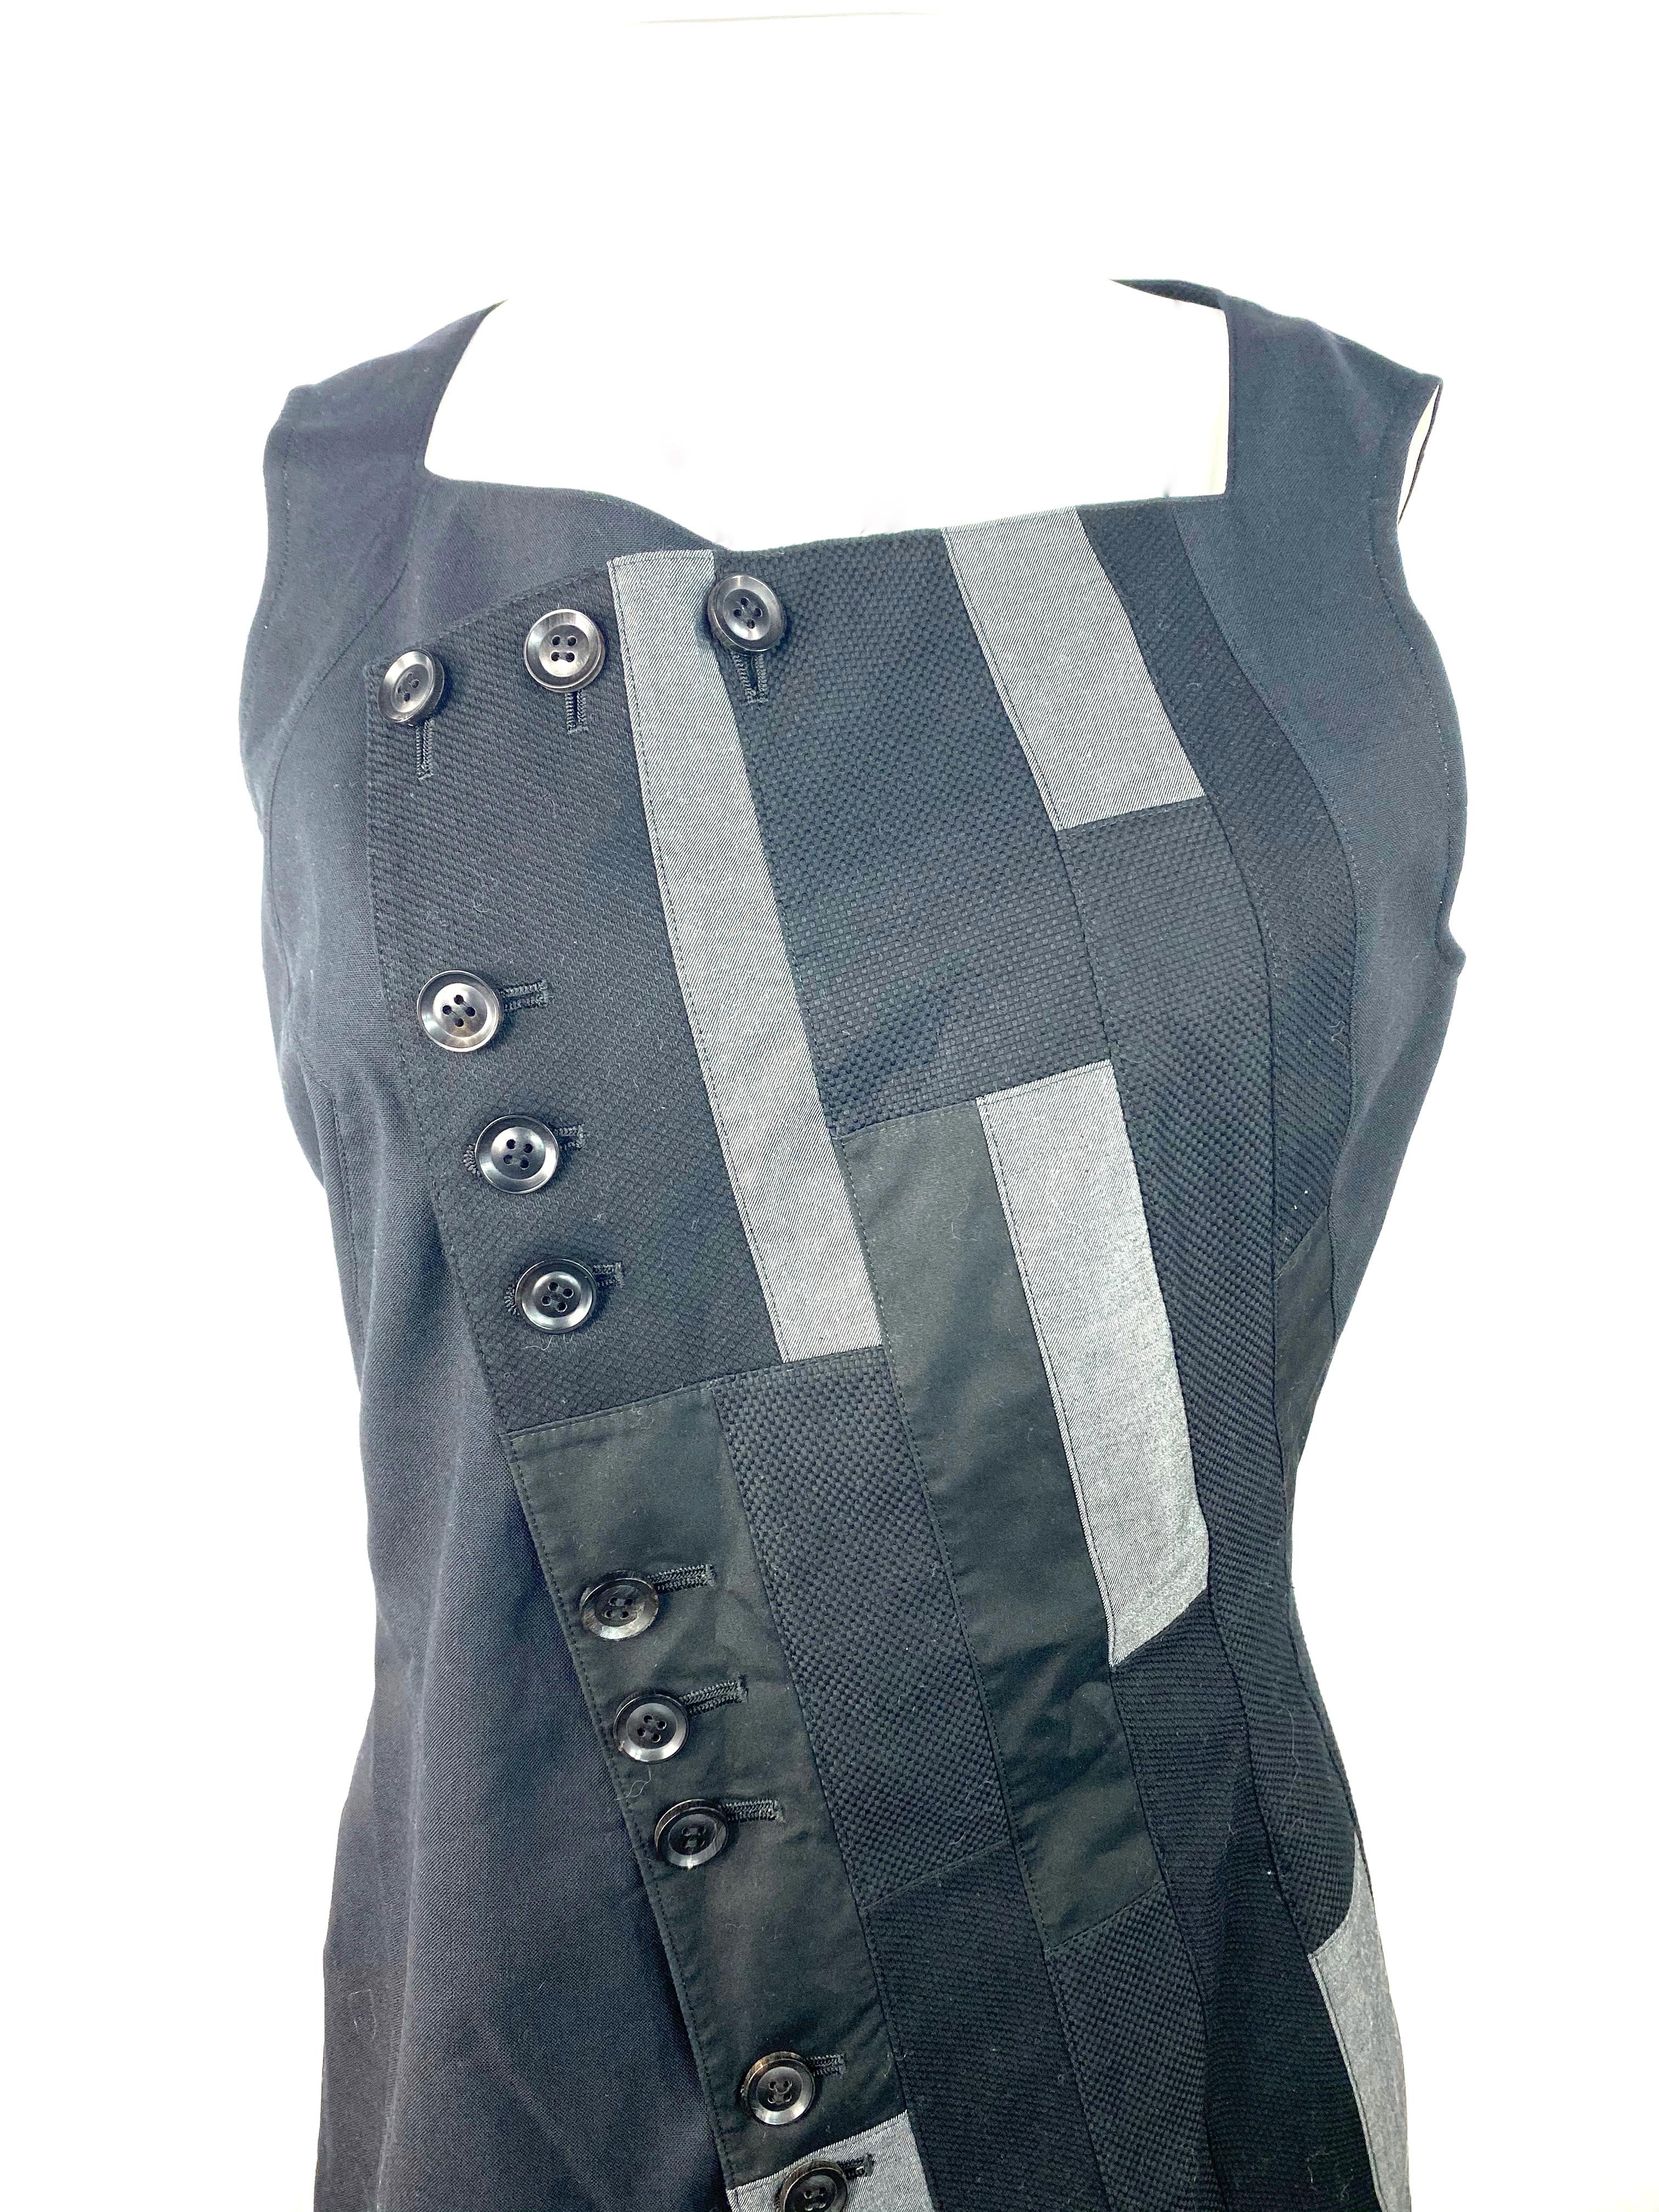 Product details:

Featuring asymmetrical design with rectangular grey and black patches detail.